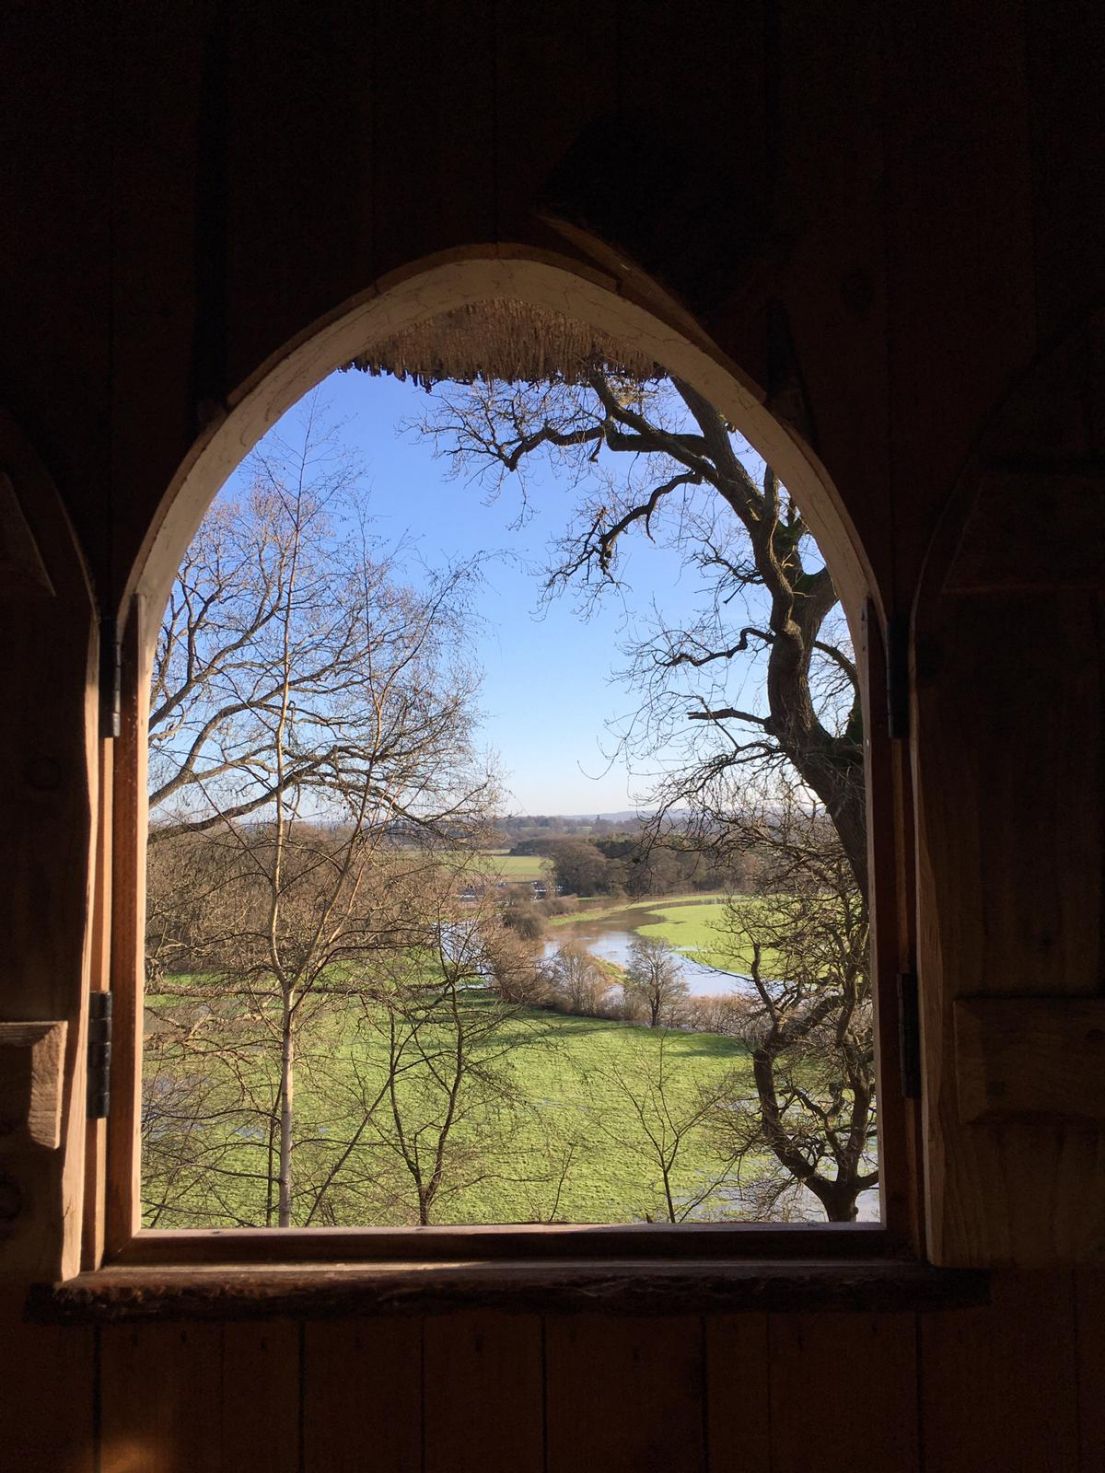 Looking out an open arched window to a wintery garden with bare trees.